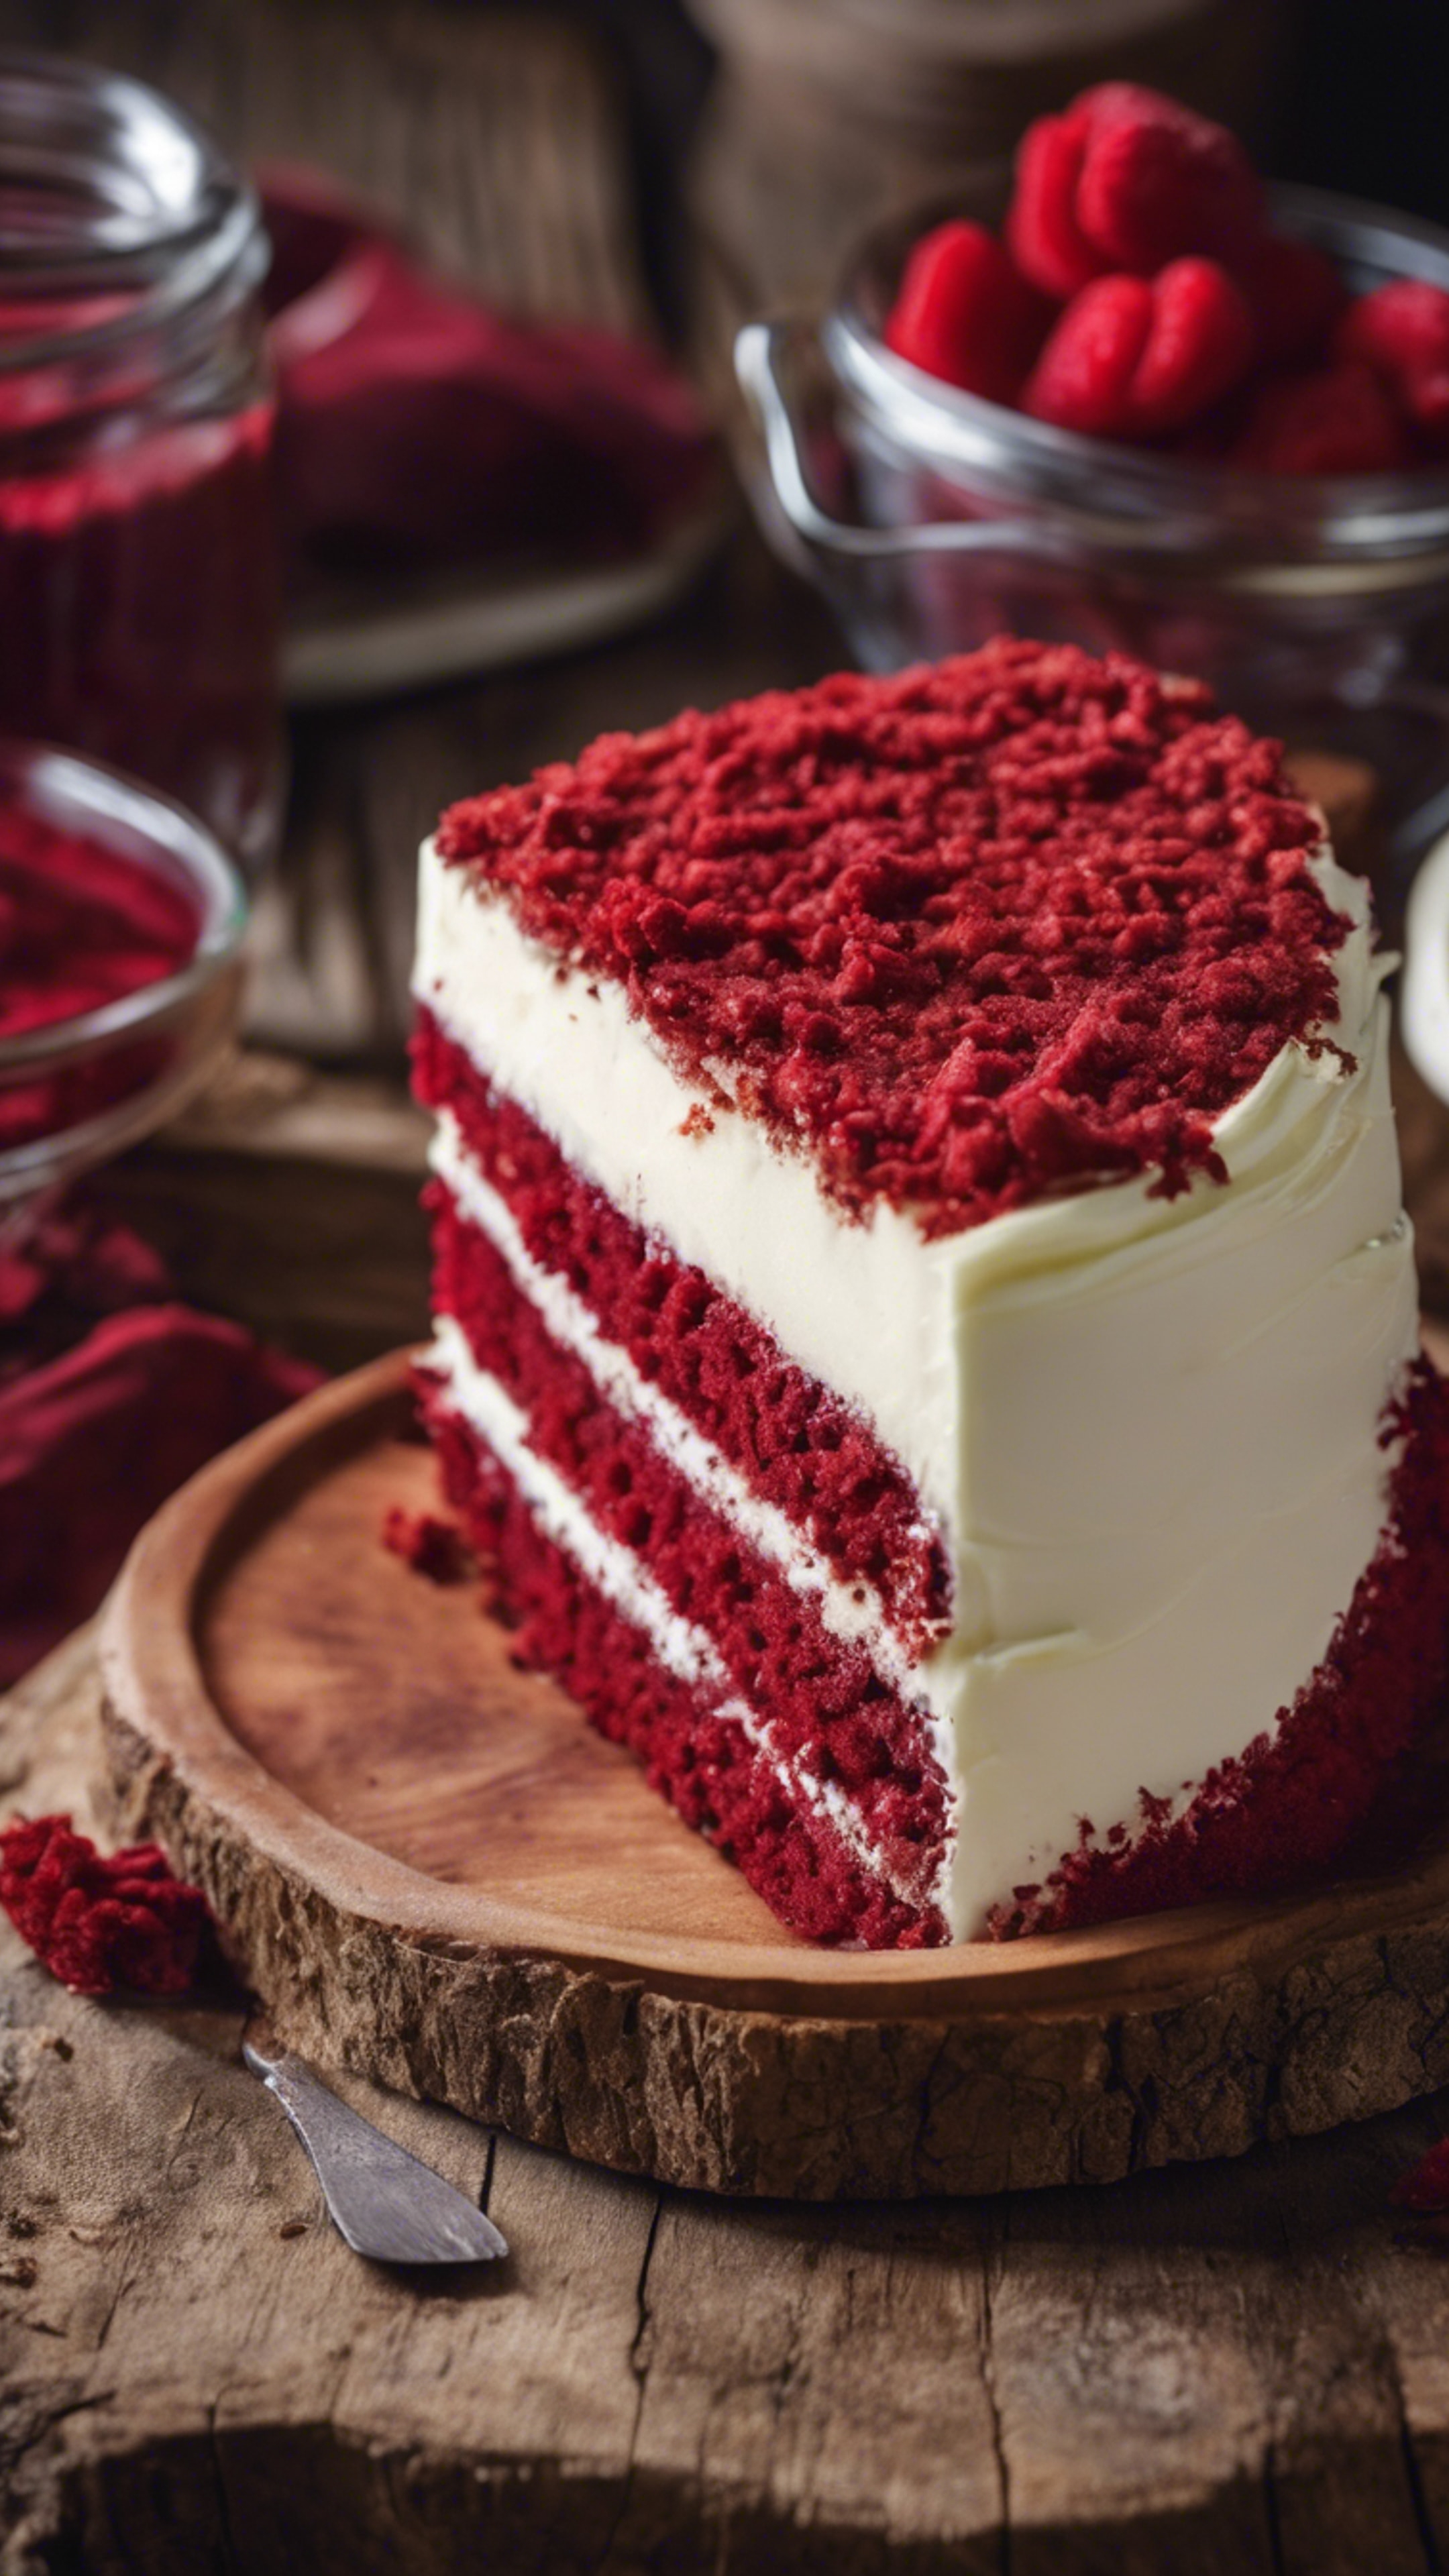 A slice of rich red velvet cake with a layer of cream cheese frosting, placed on a rustic wooden table. Papel de parede[5b147ad1f433484e86de]